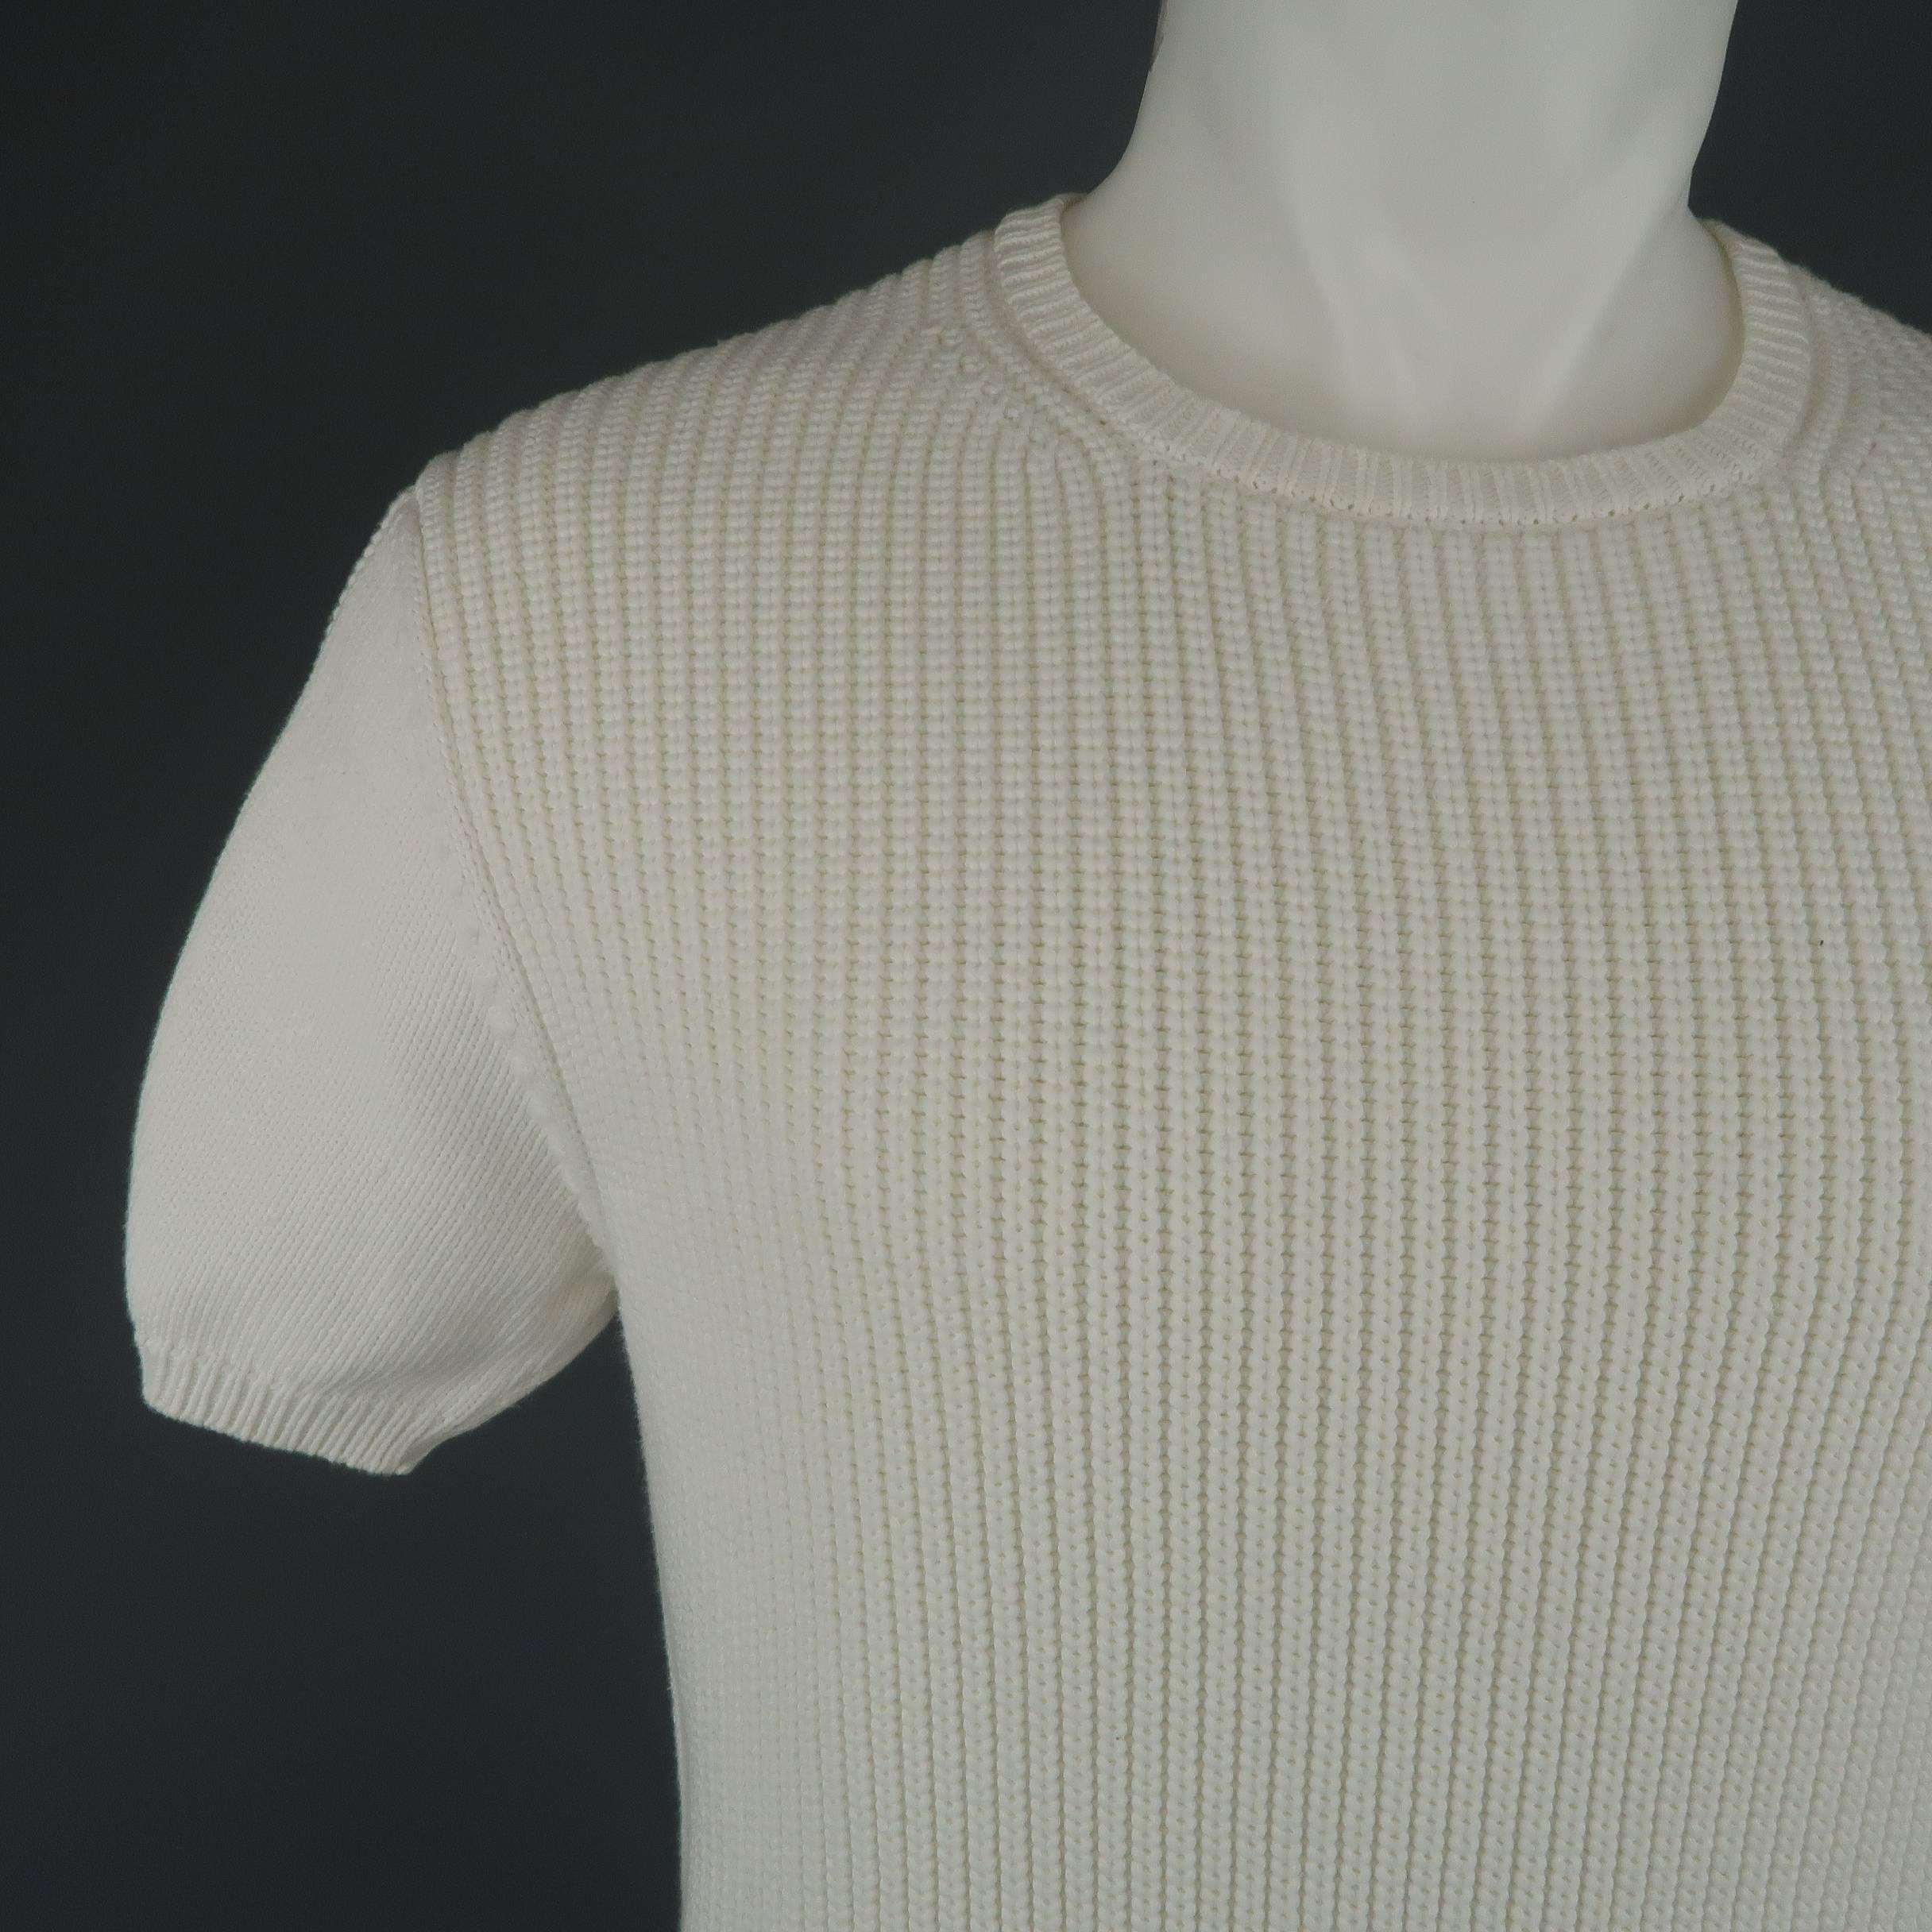 JIL SANDER  pullover sweater comes in white cotton blend fisherman knit with a crewneck, and mixed texture paneled short sleeves. Made in Italy.
 
Excellent Pre-Owned Condition.
Marked: IT 50
 
Measurements:
 
Shoulder: 19 in.
Chest: 42 in.
Sleeve: